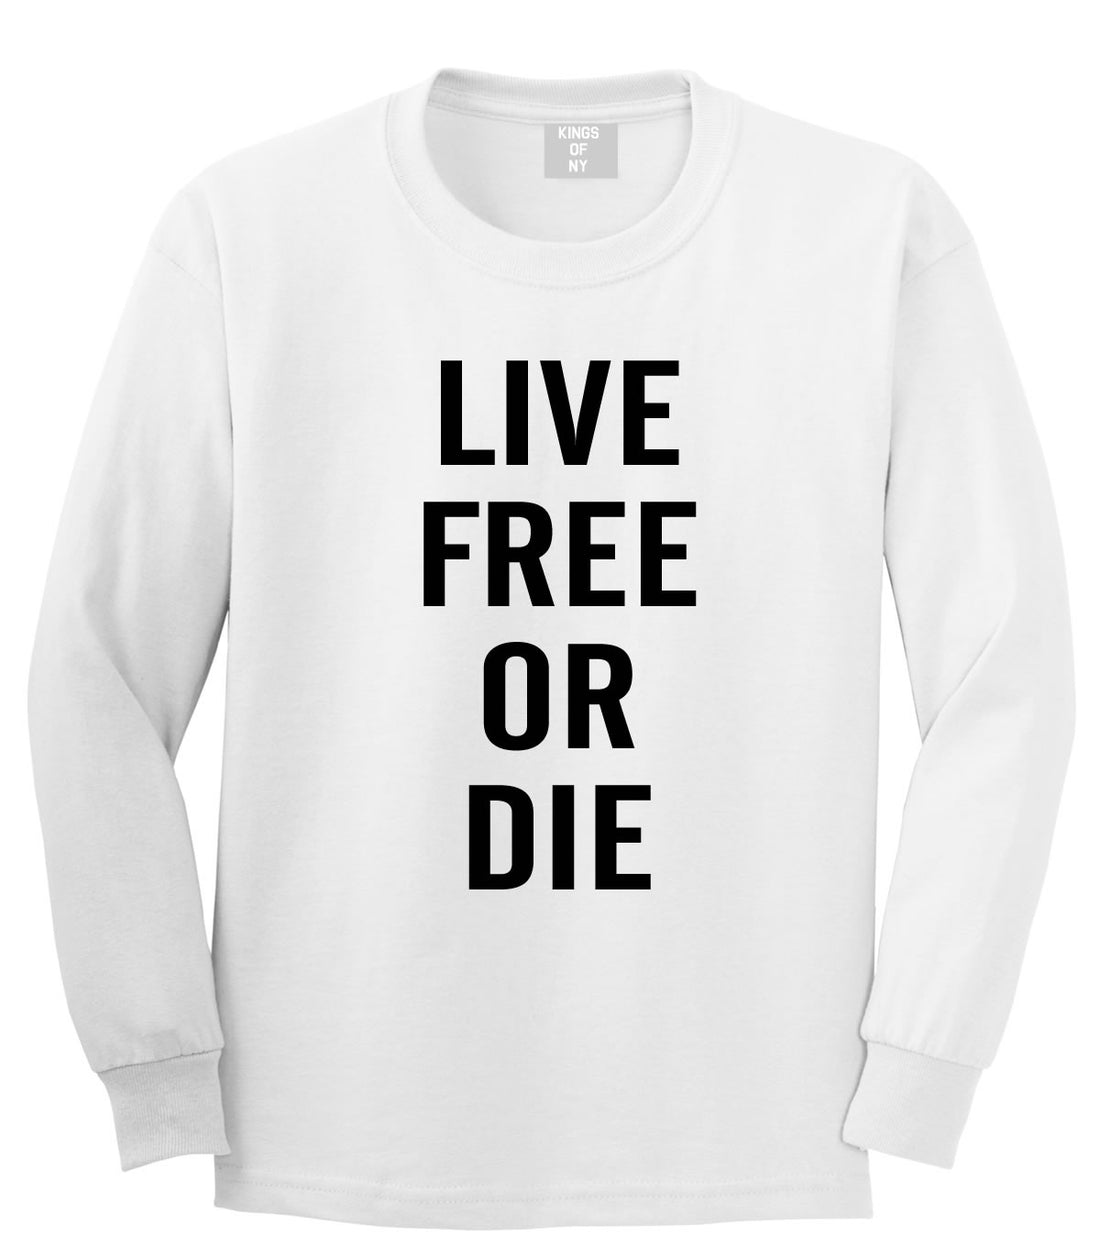 Live Free Or Die Long Sleeve T-Shirt in White By Kings Of NY